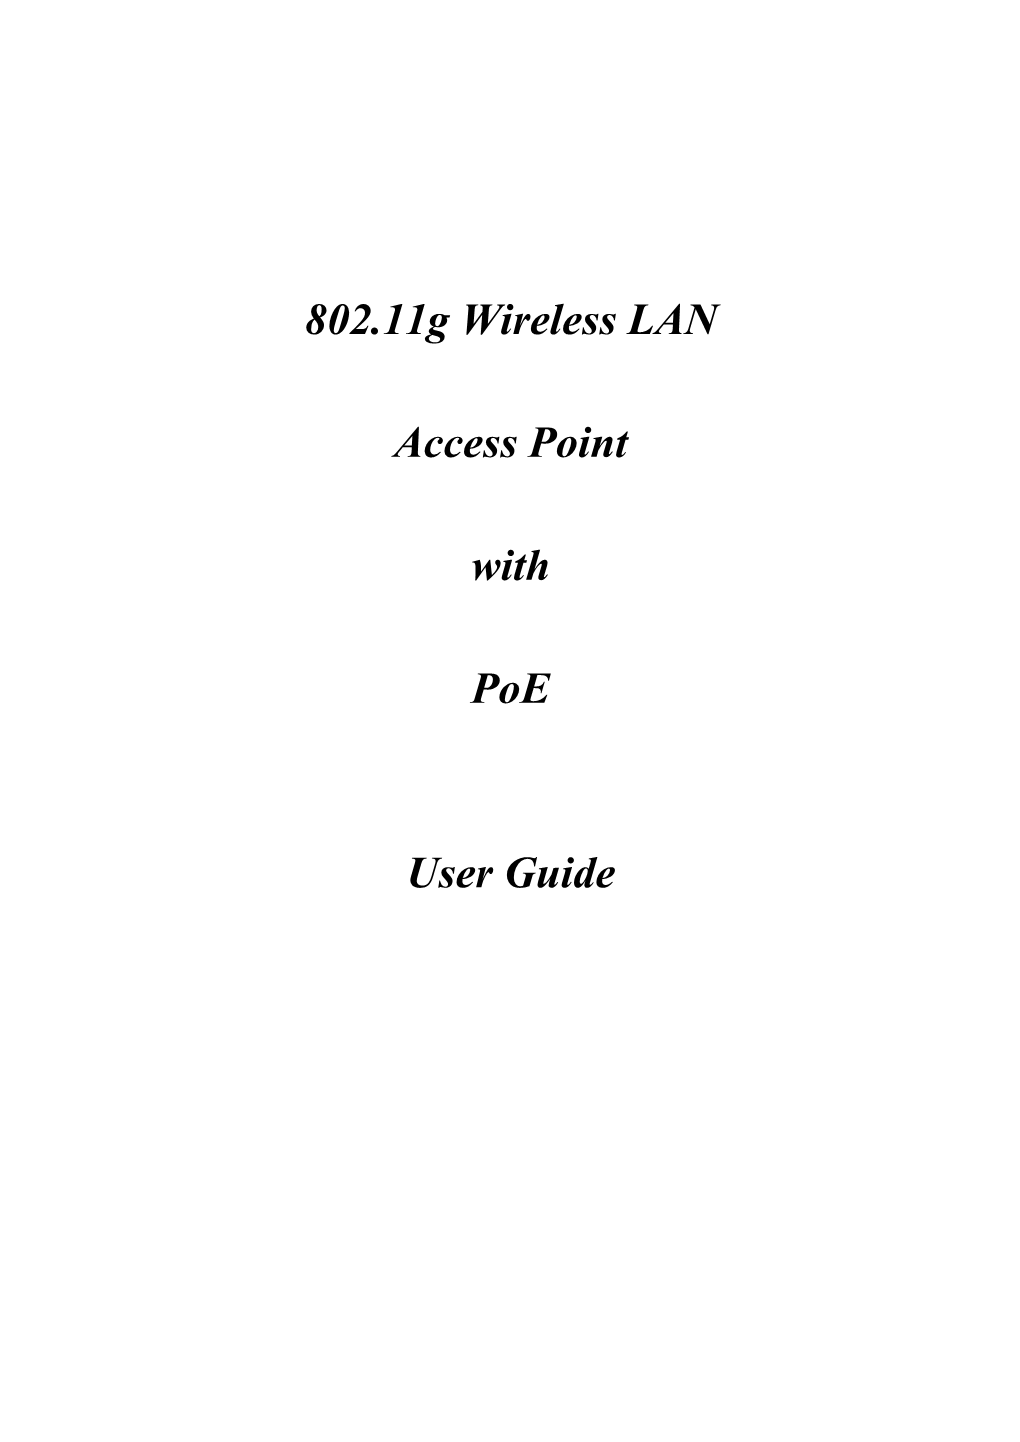 802.11G Wireless LAN Access Point with Poe User Guide